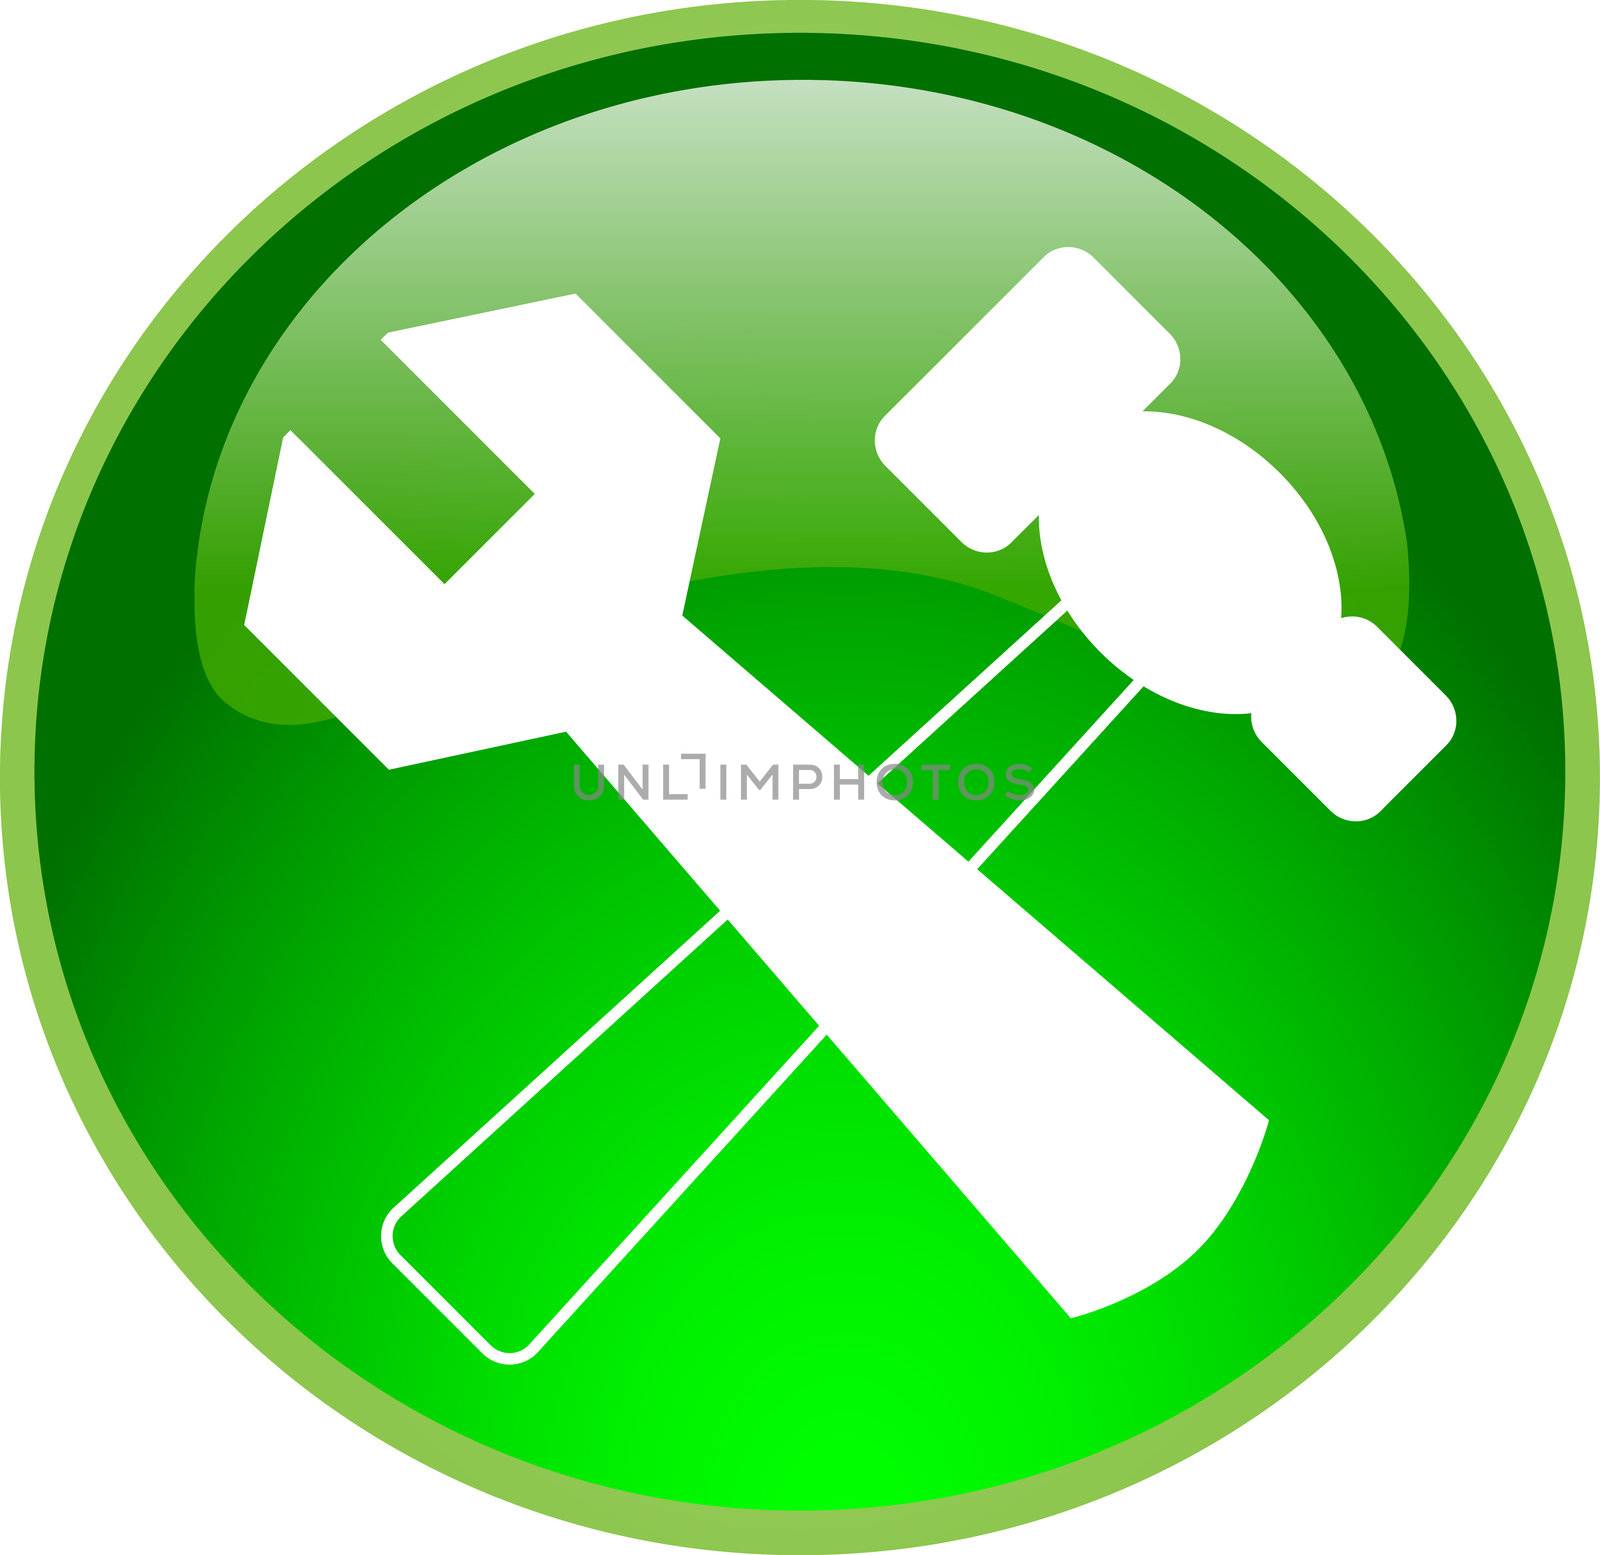 green repair button by peromarketing